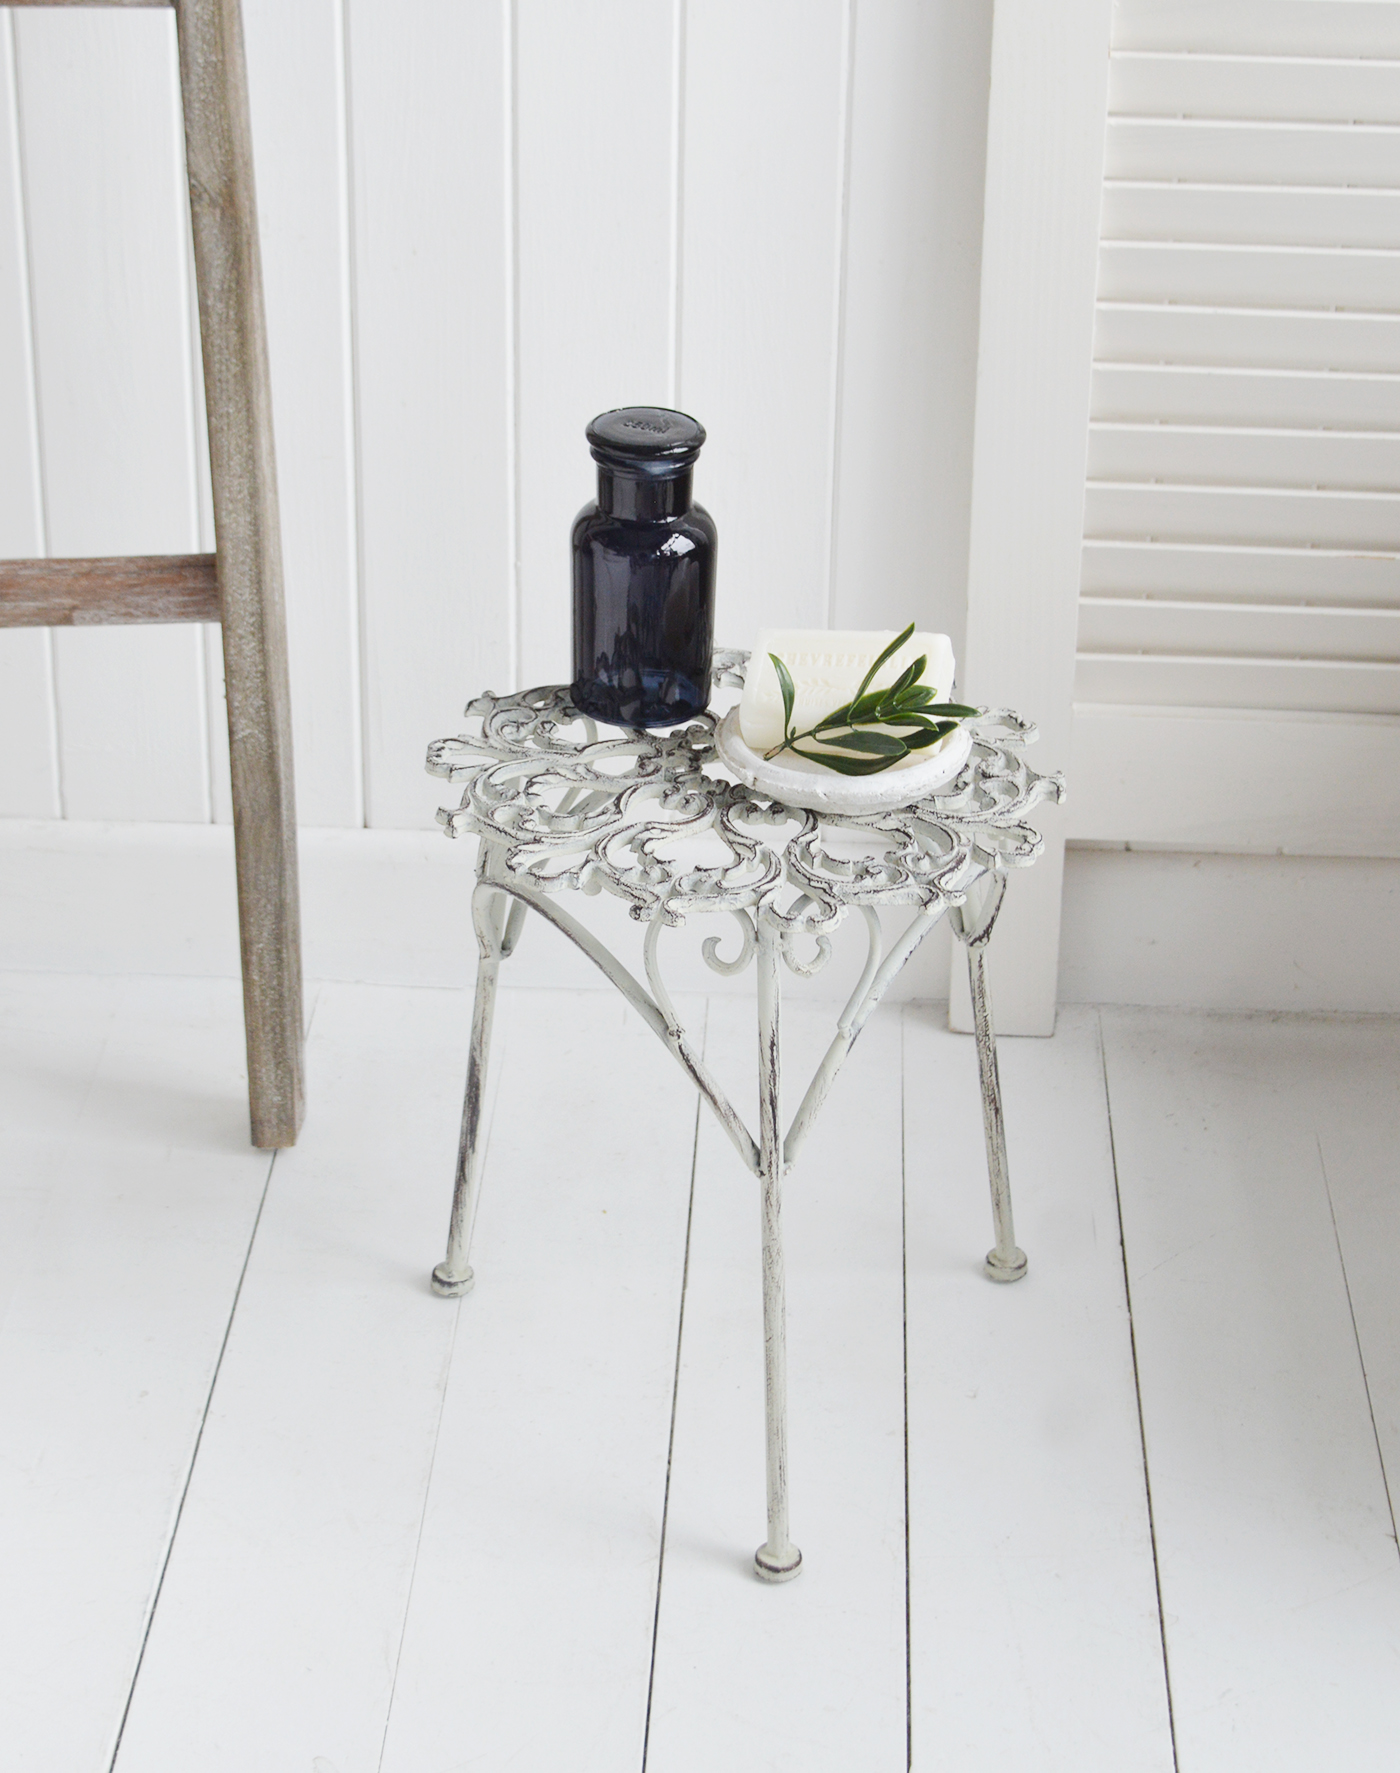 Harvard Little metal grey side table - Modern farmhouse, country and coastal furniture for New England interiors